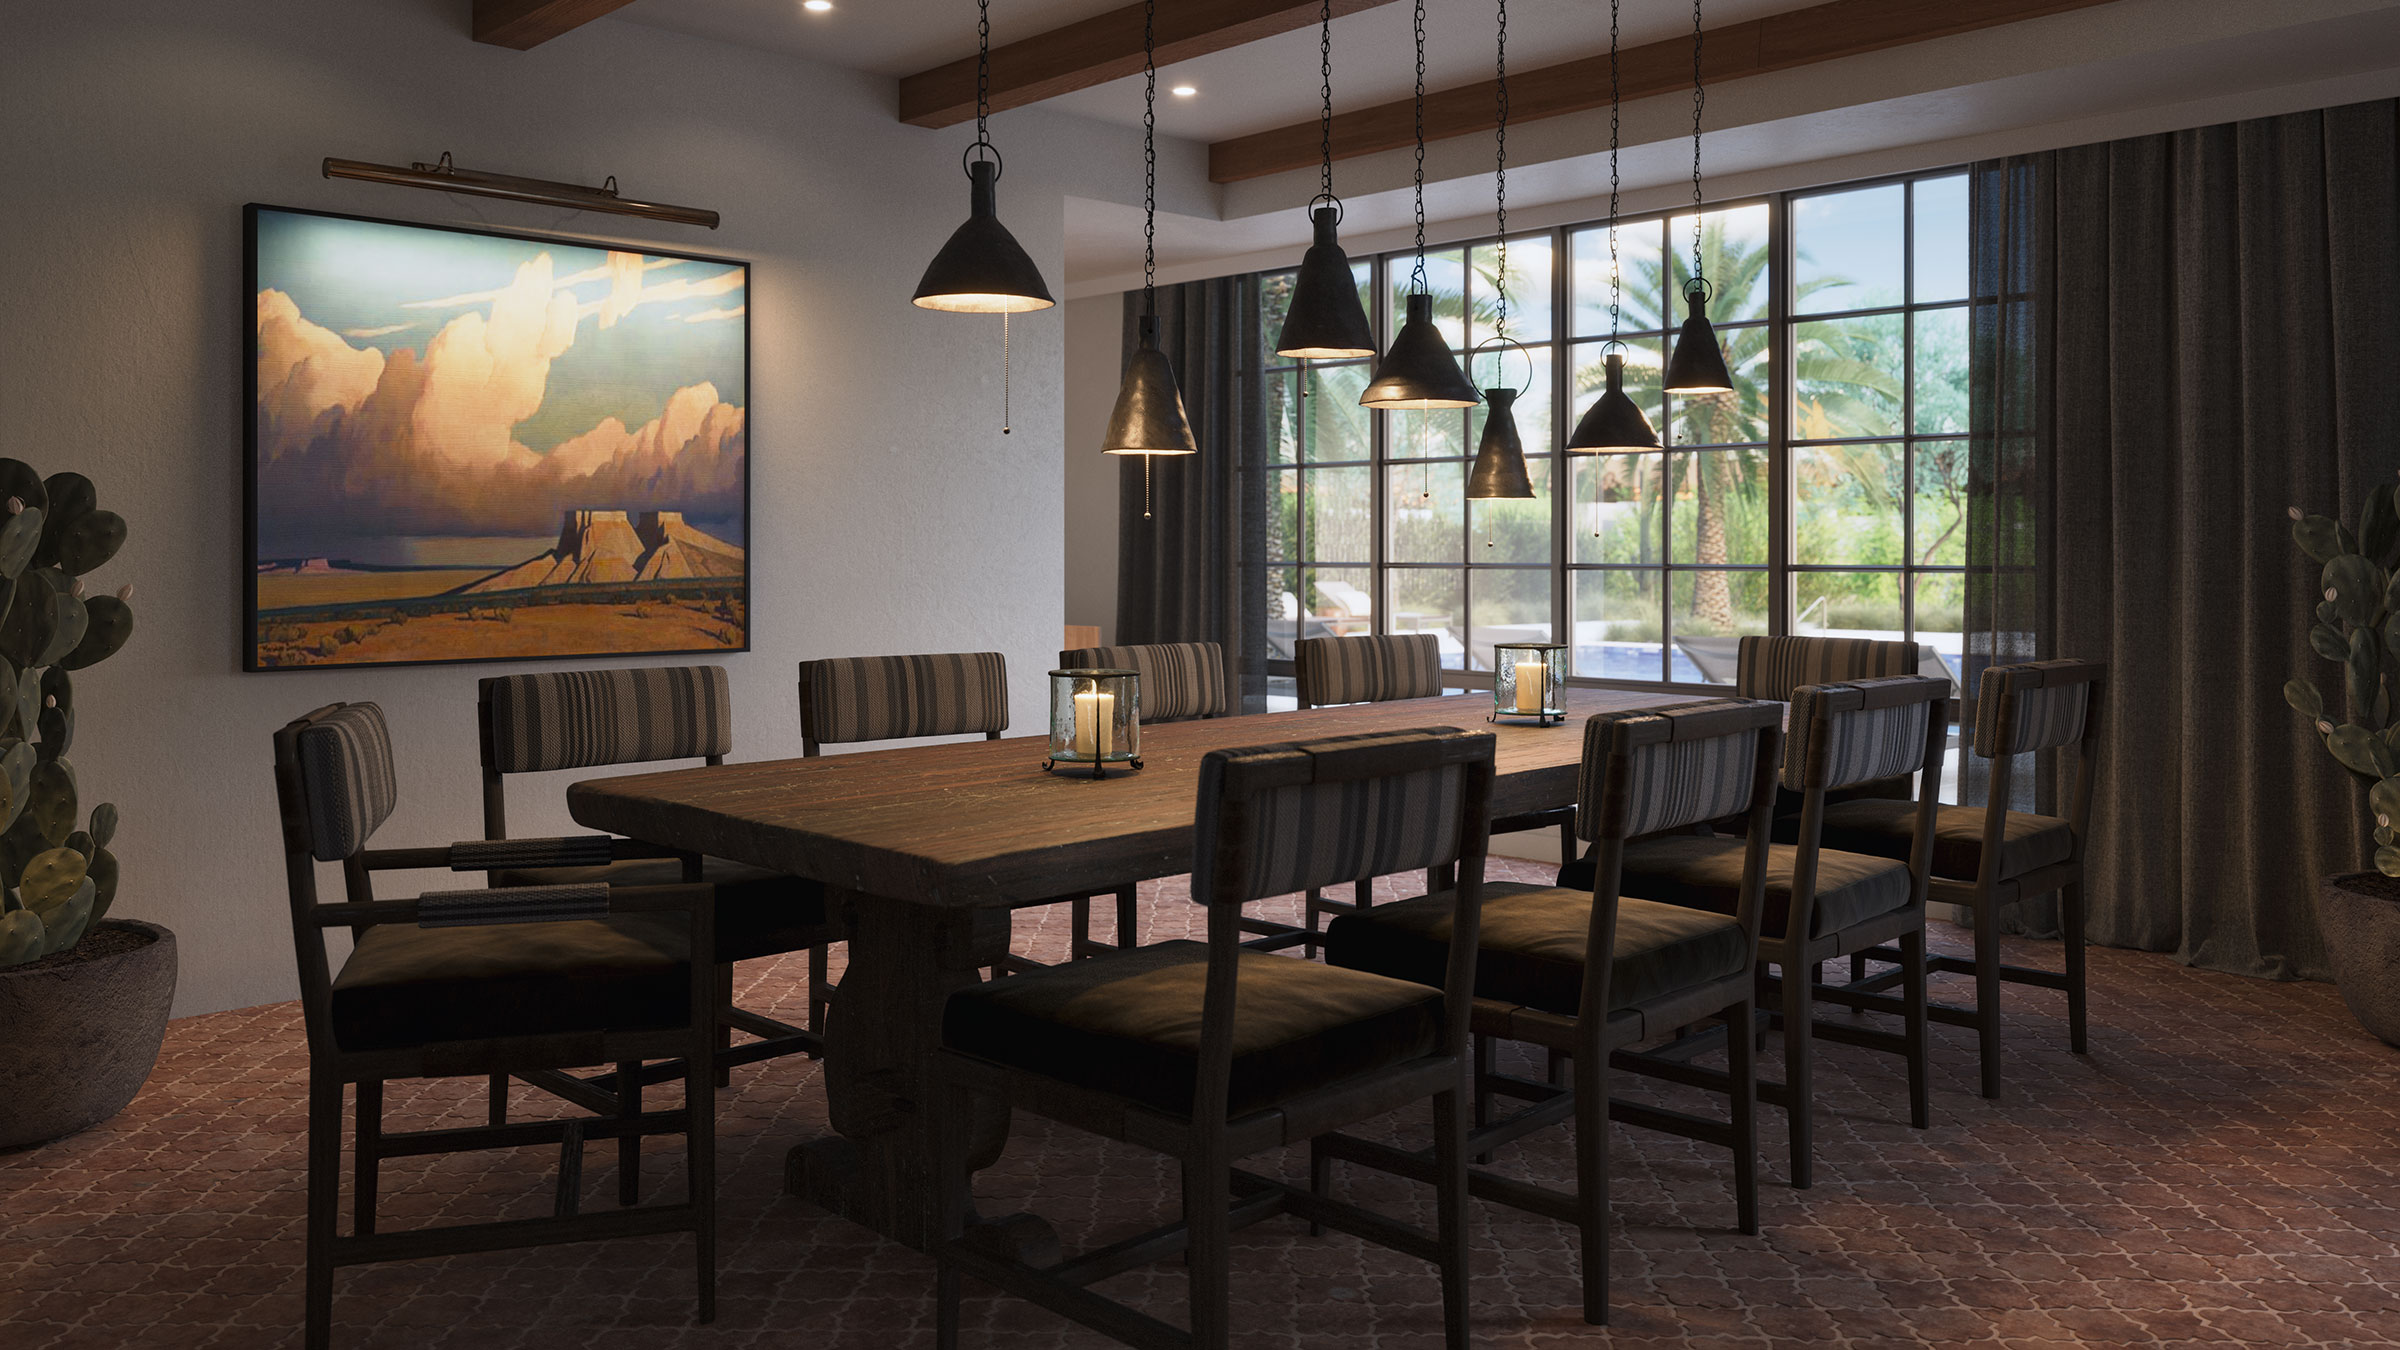 Residents can reserve the dining room for private dinners and events.